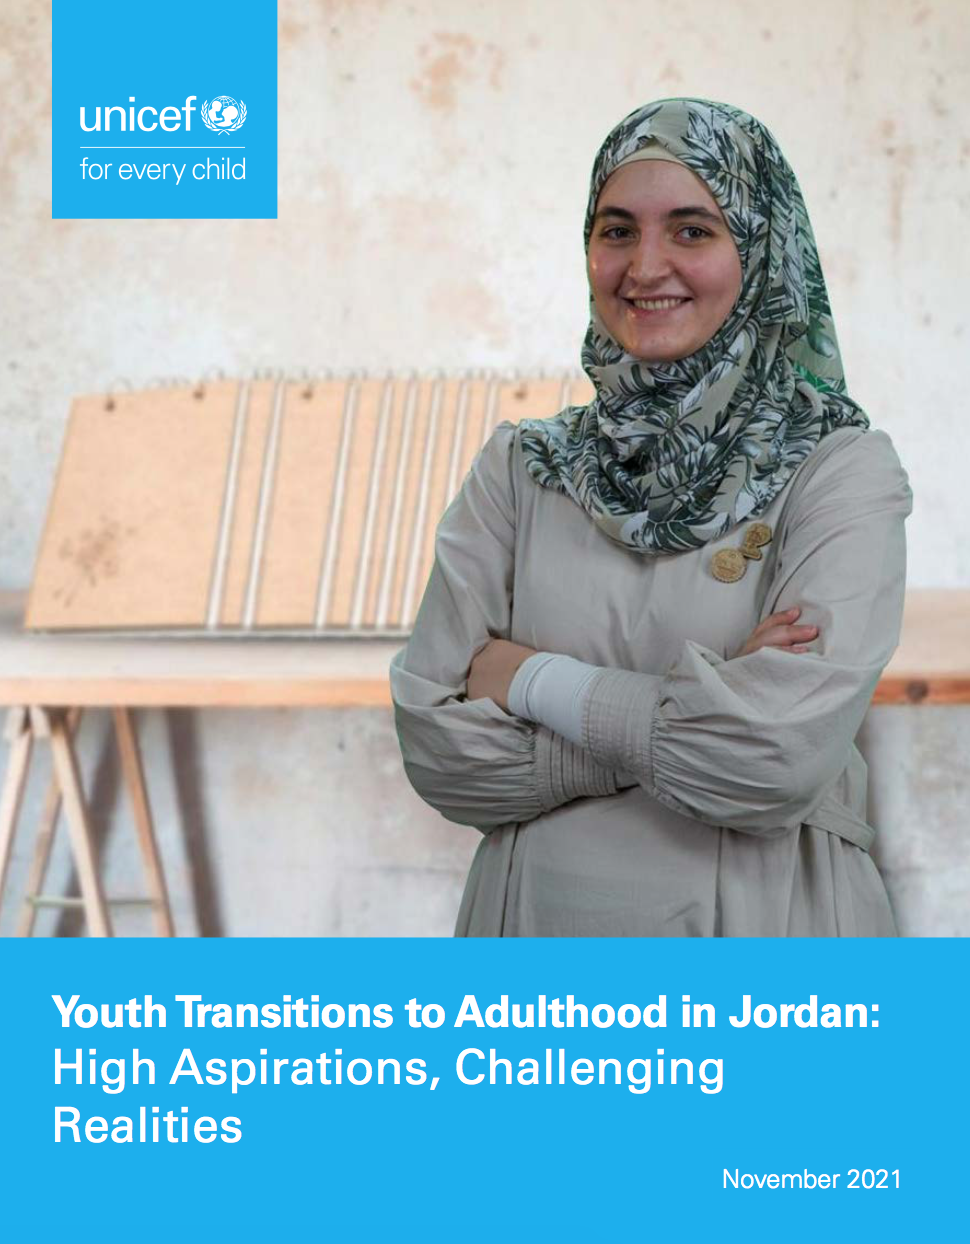 Youth Transitions to Adulthood in Jordan: High Aspirations, Challenging Realities